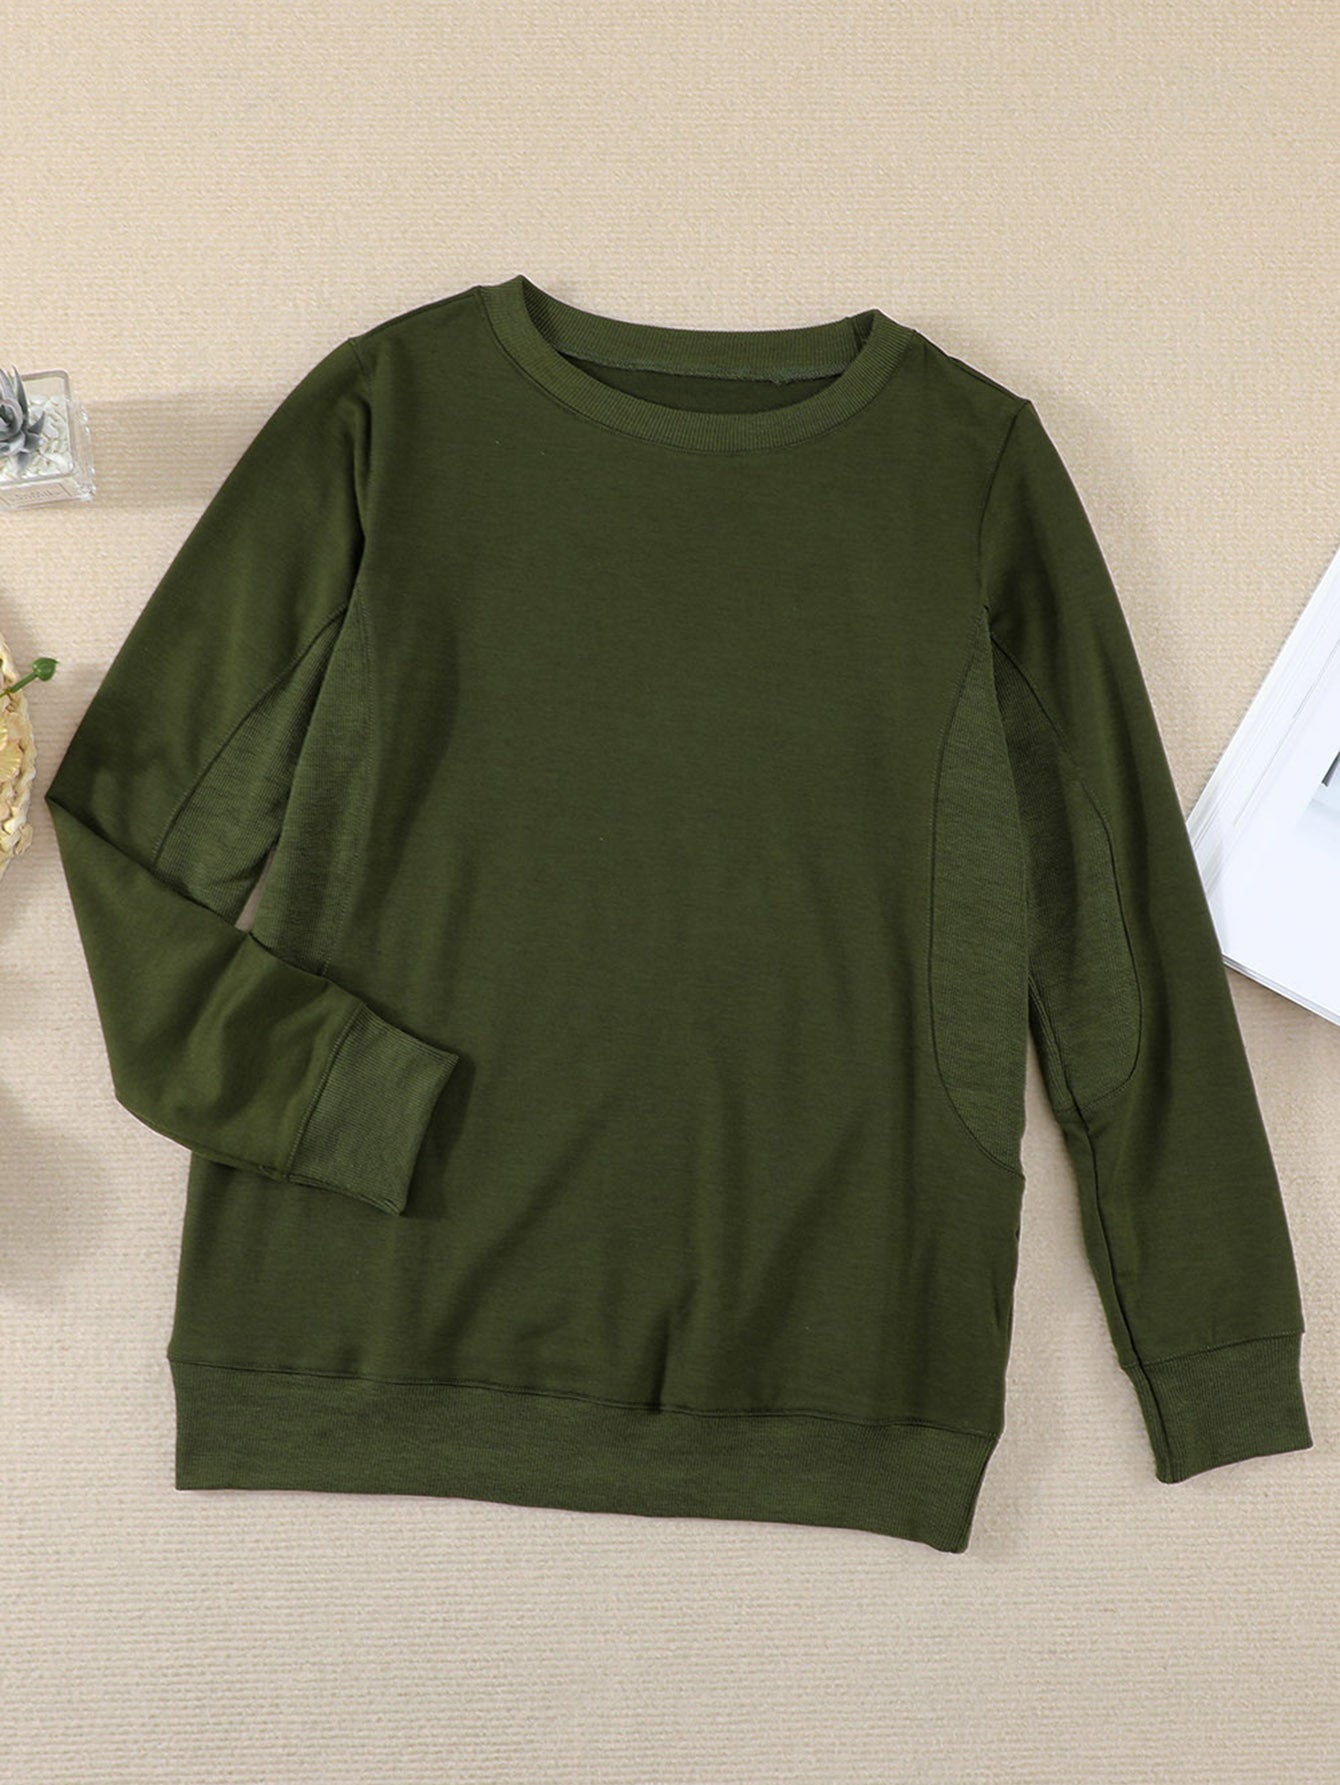 Women's Fashion Solid Color Round Neck Pullover Casual Long Sleeve Loose Sweatshirt Top Sai Feel